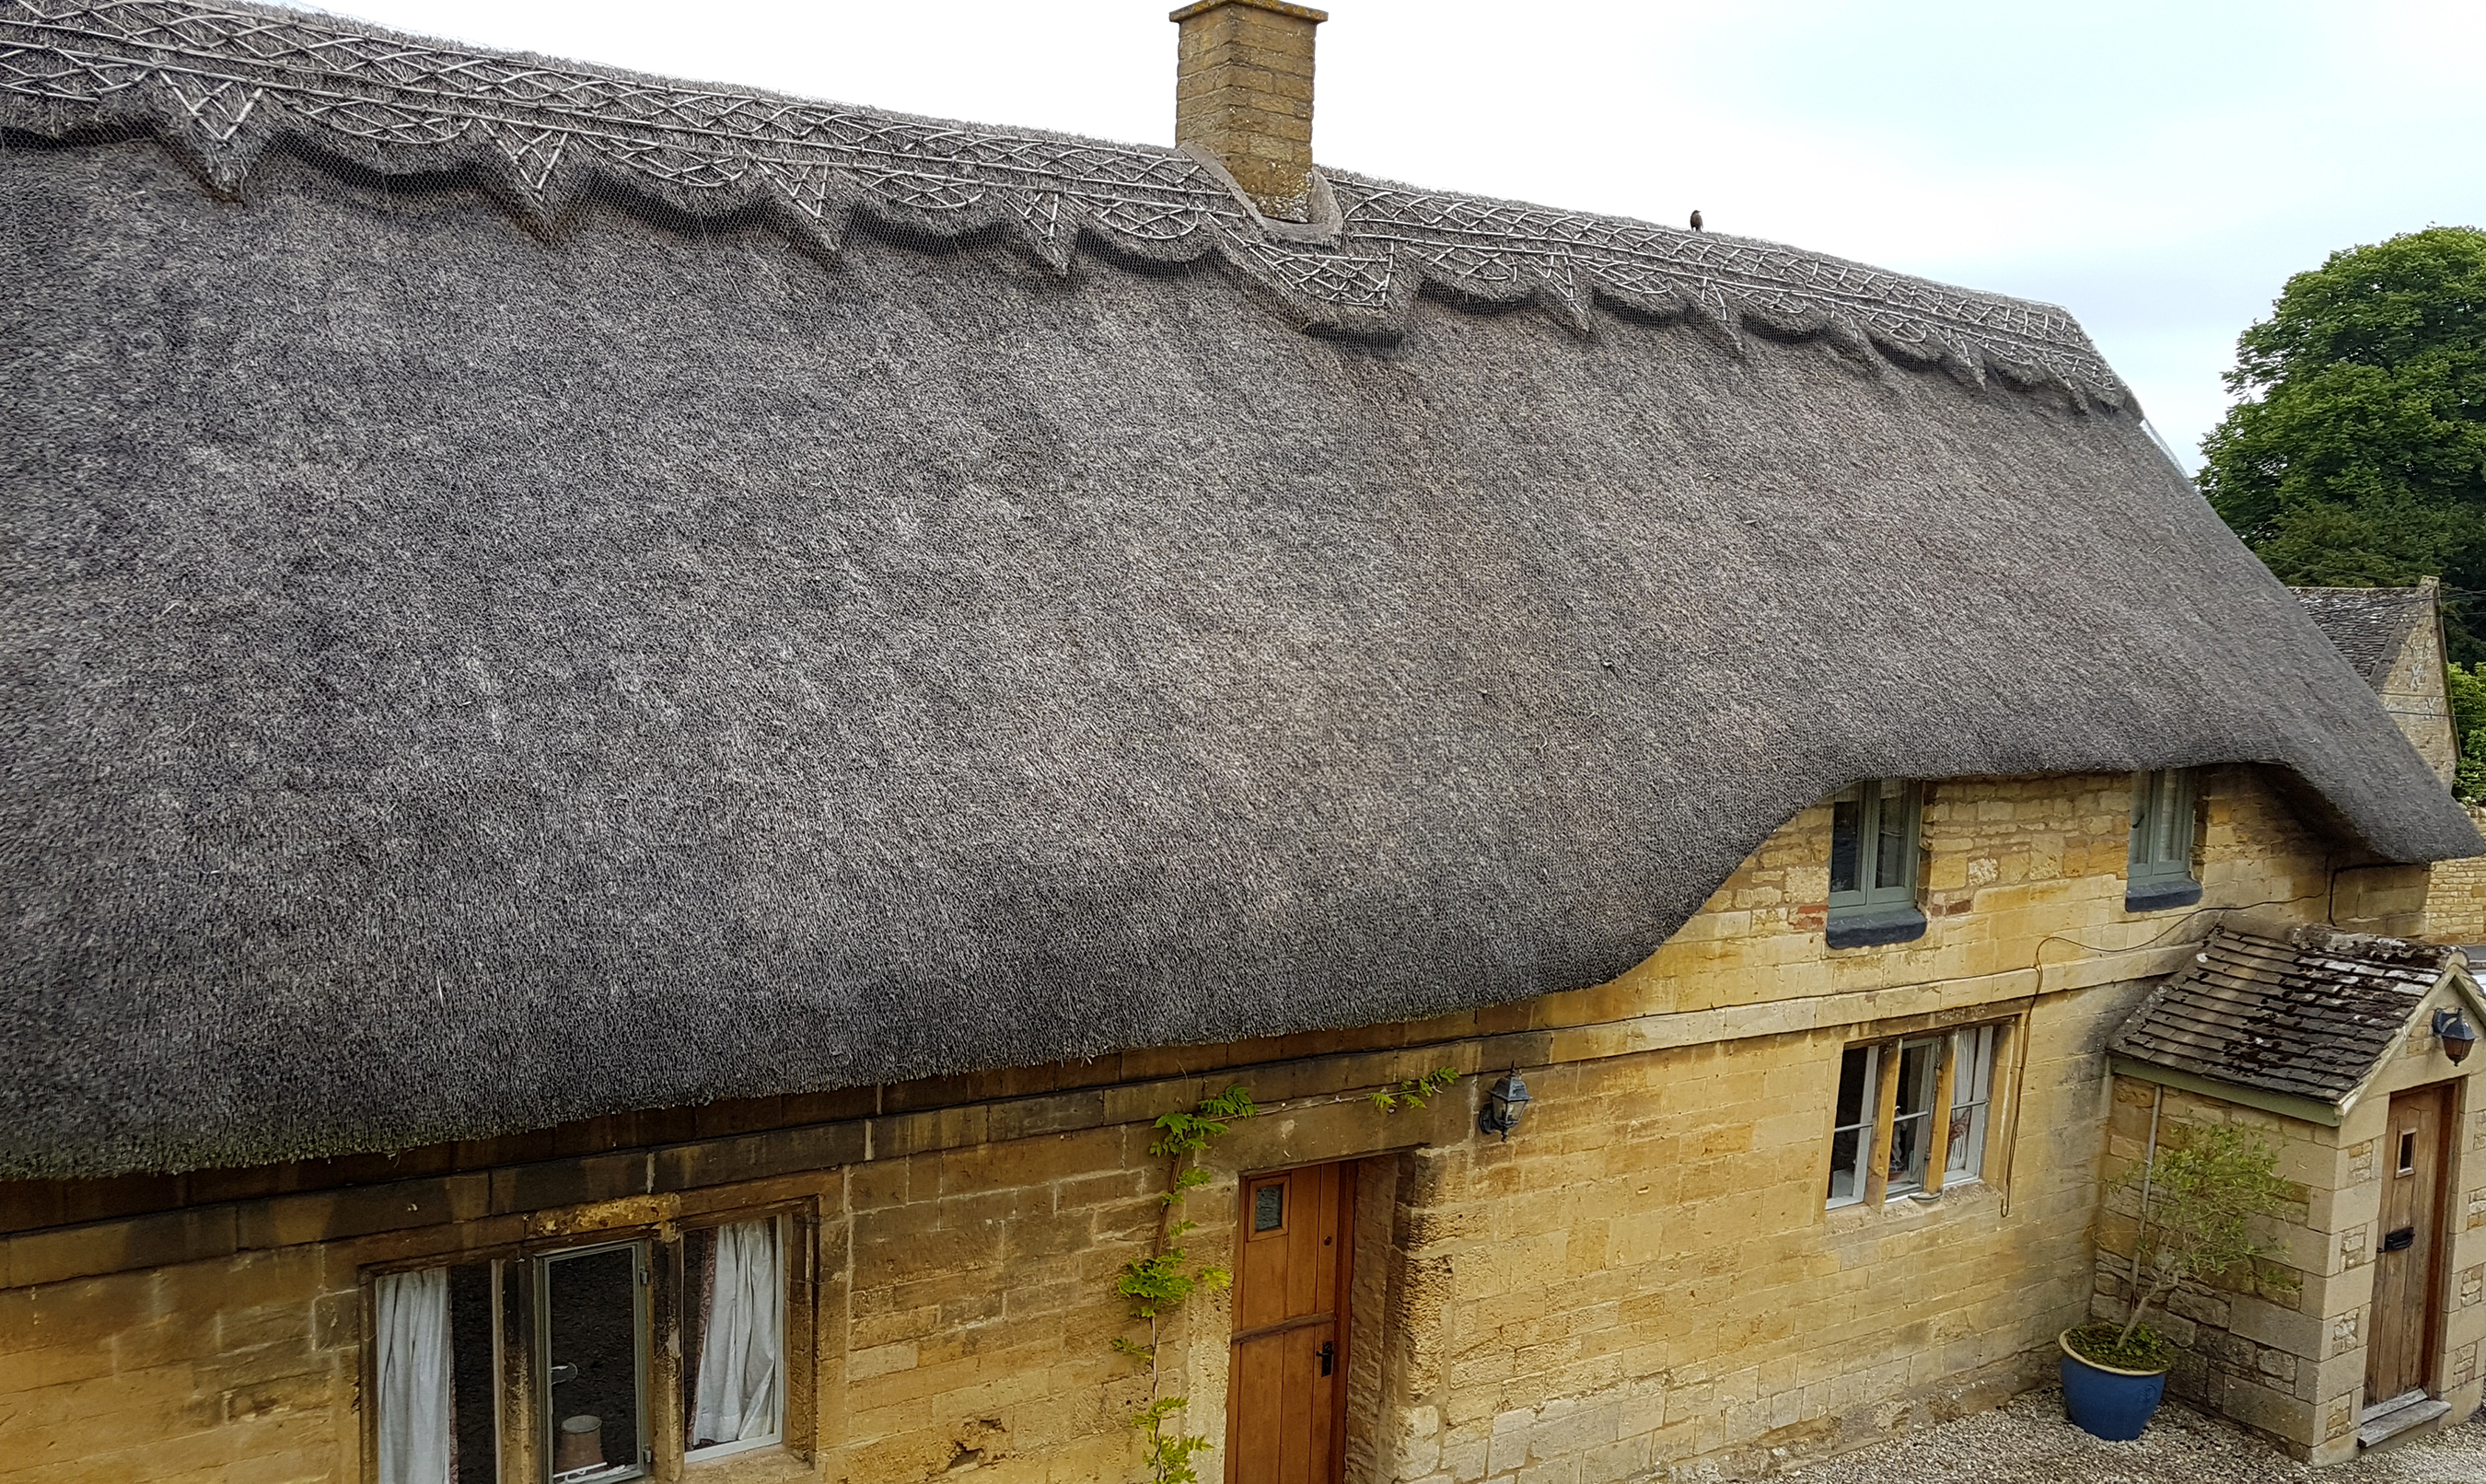 Is a Thatched Roof Property a Good Idea if You Own a Luxury Car?